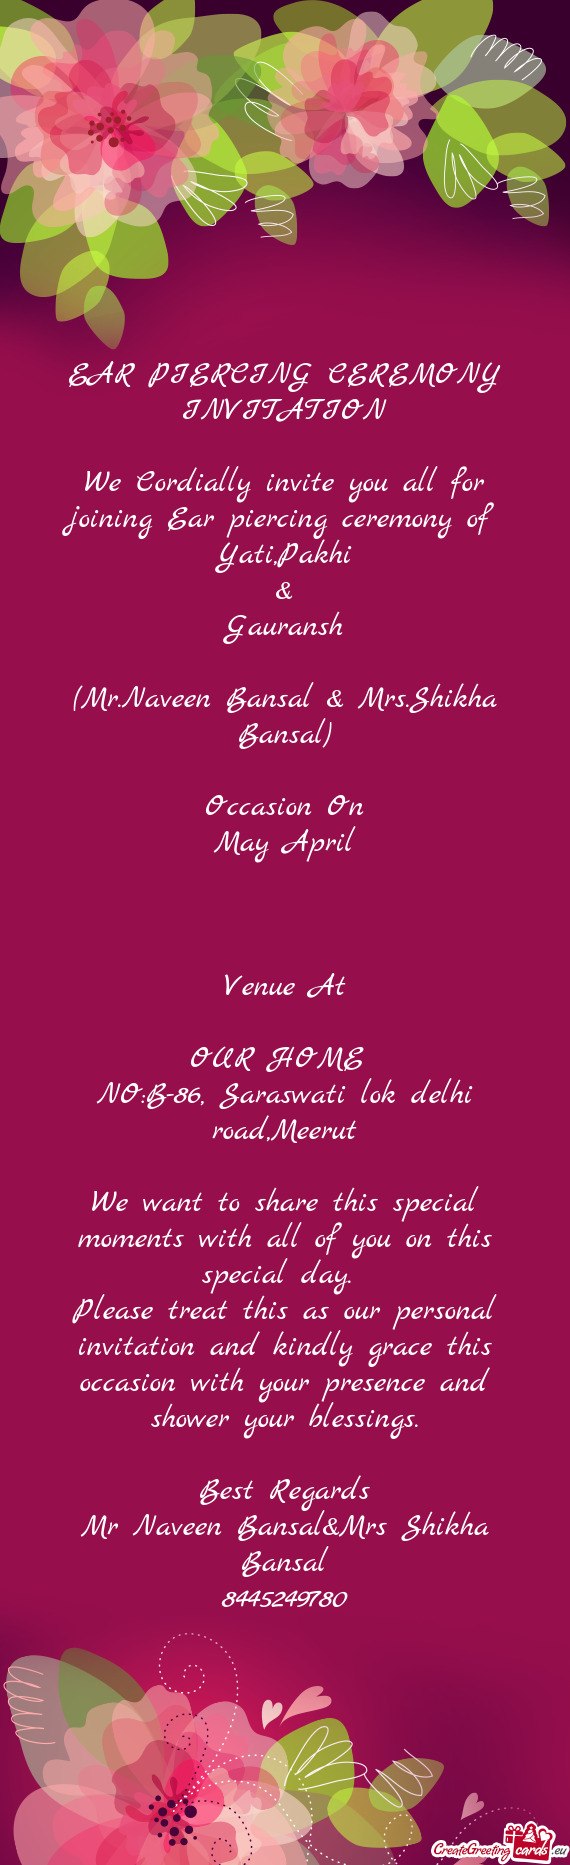 We Cordially invite you all for joining Ear piercing ceremony of